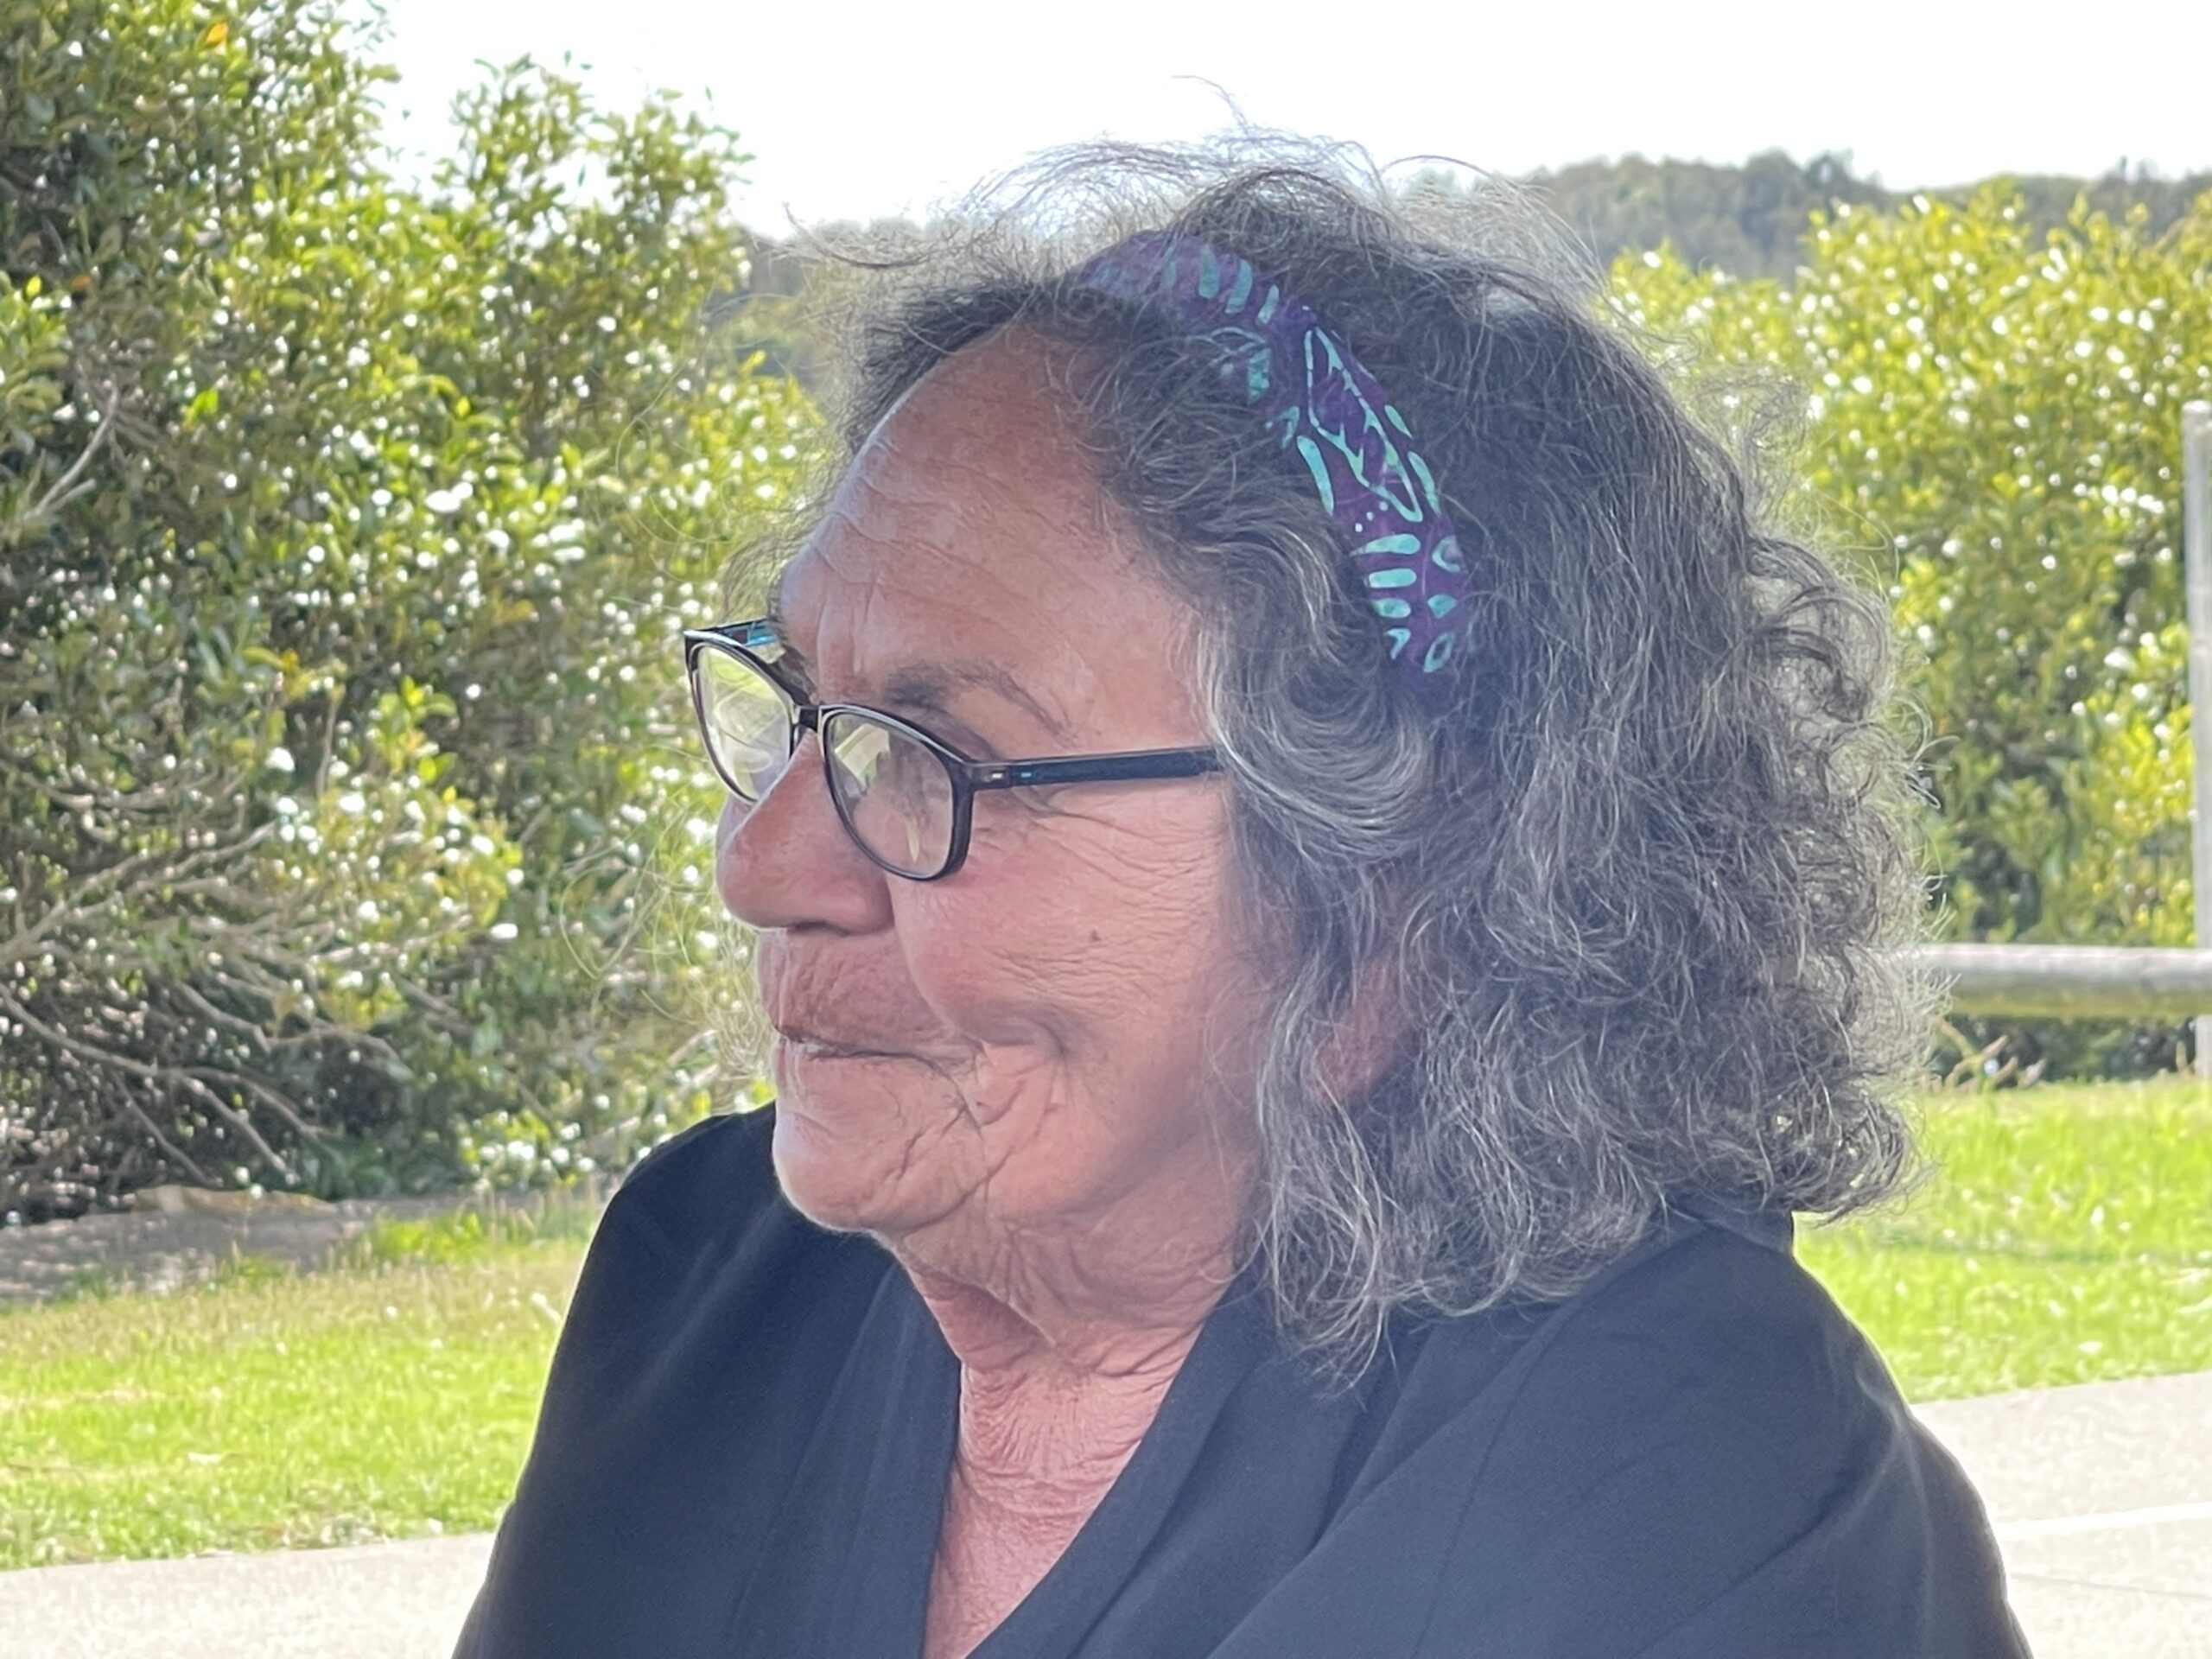 STORYTELLING WITH YUIN ELDER VIVIAN MASON FROM GNARL CULTURAL TOURS